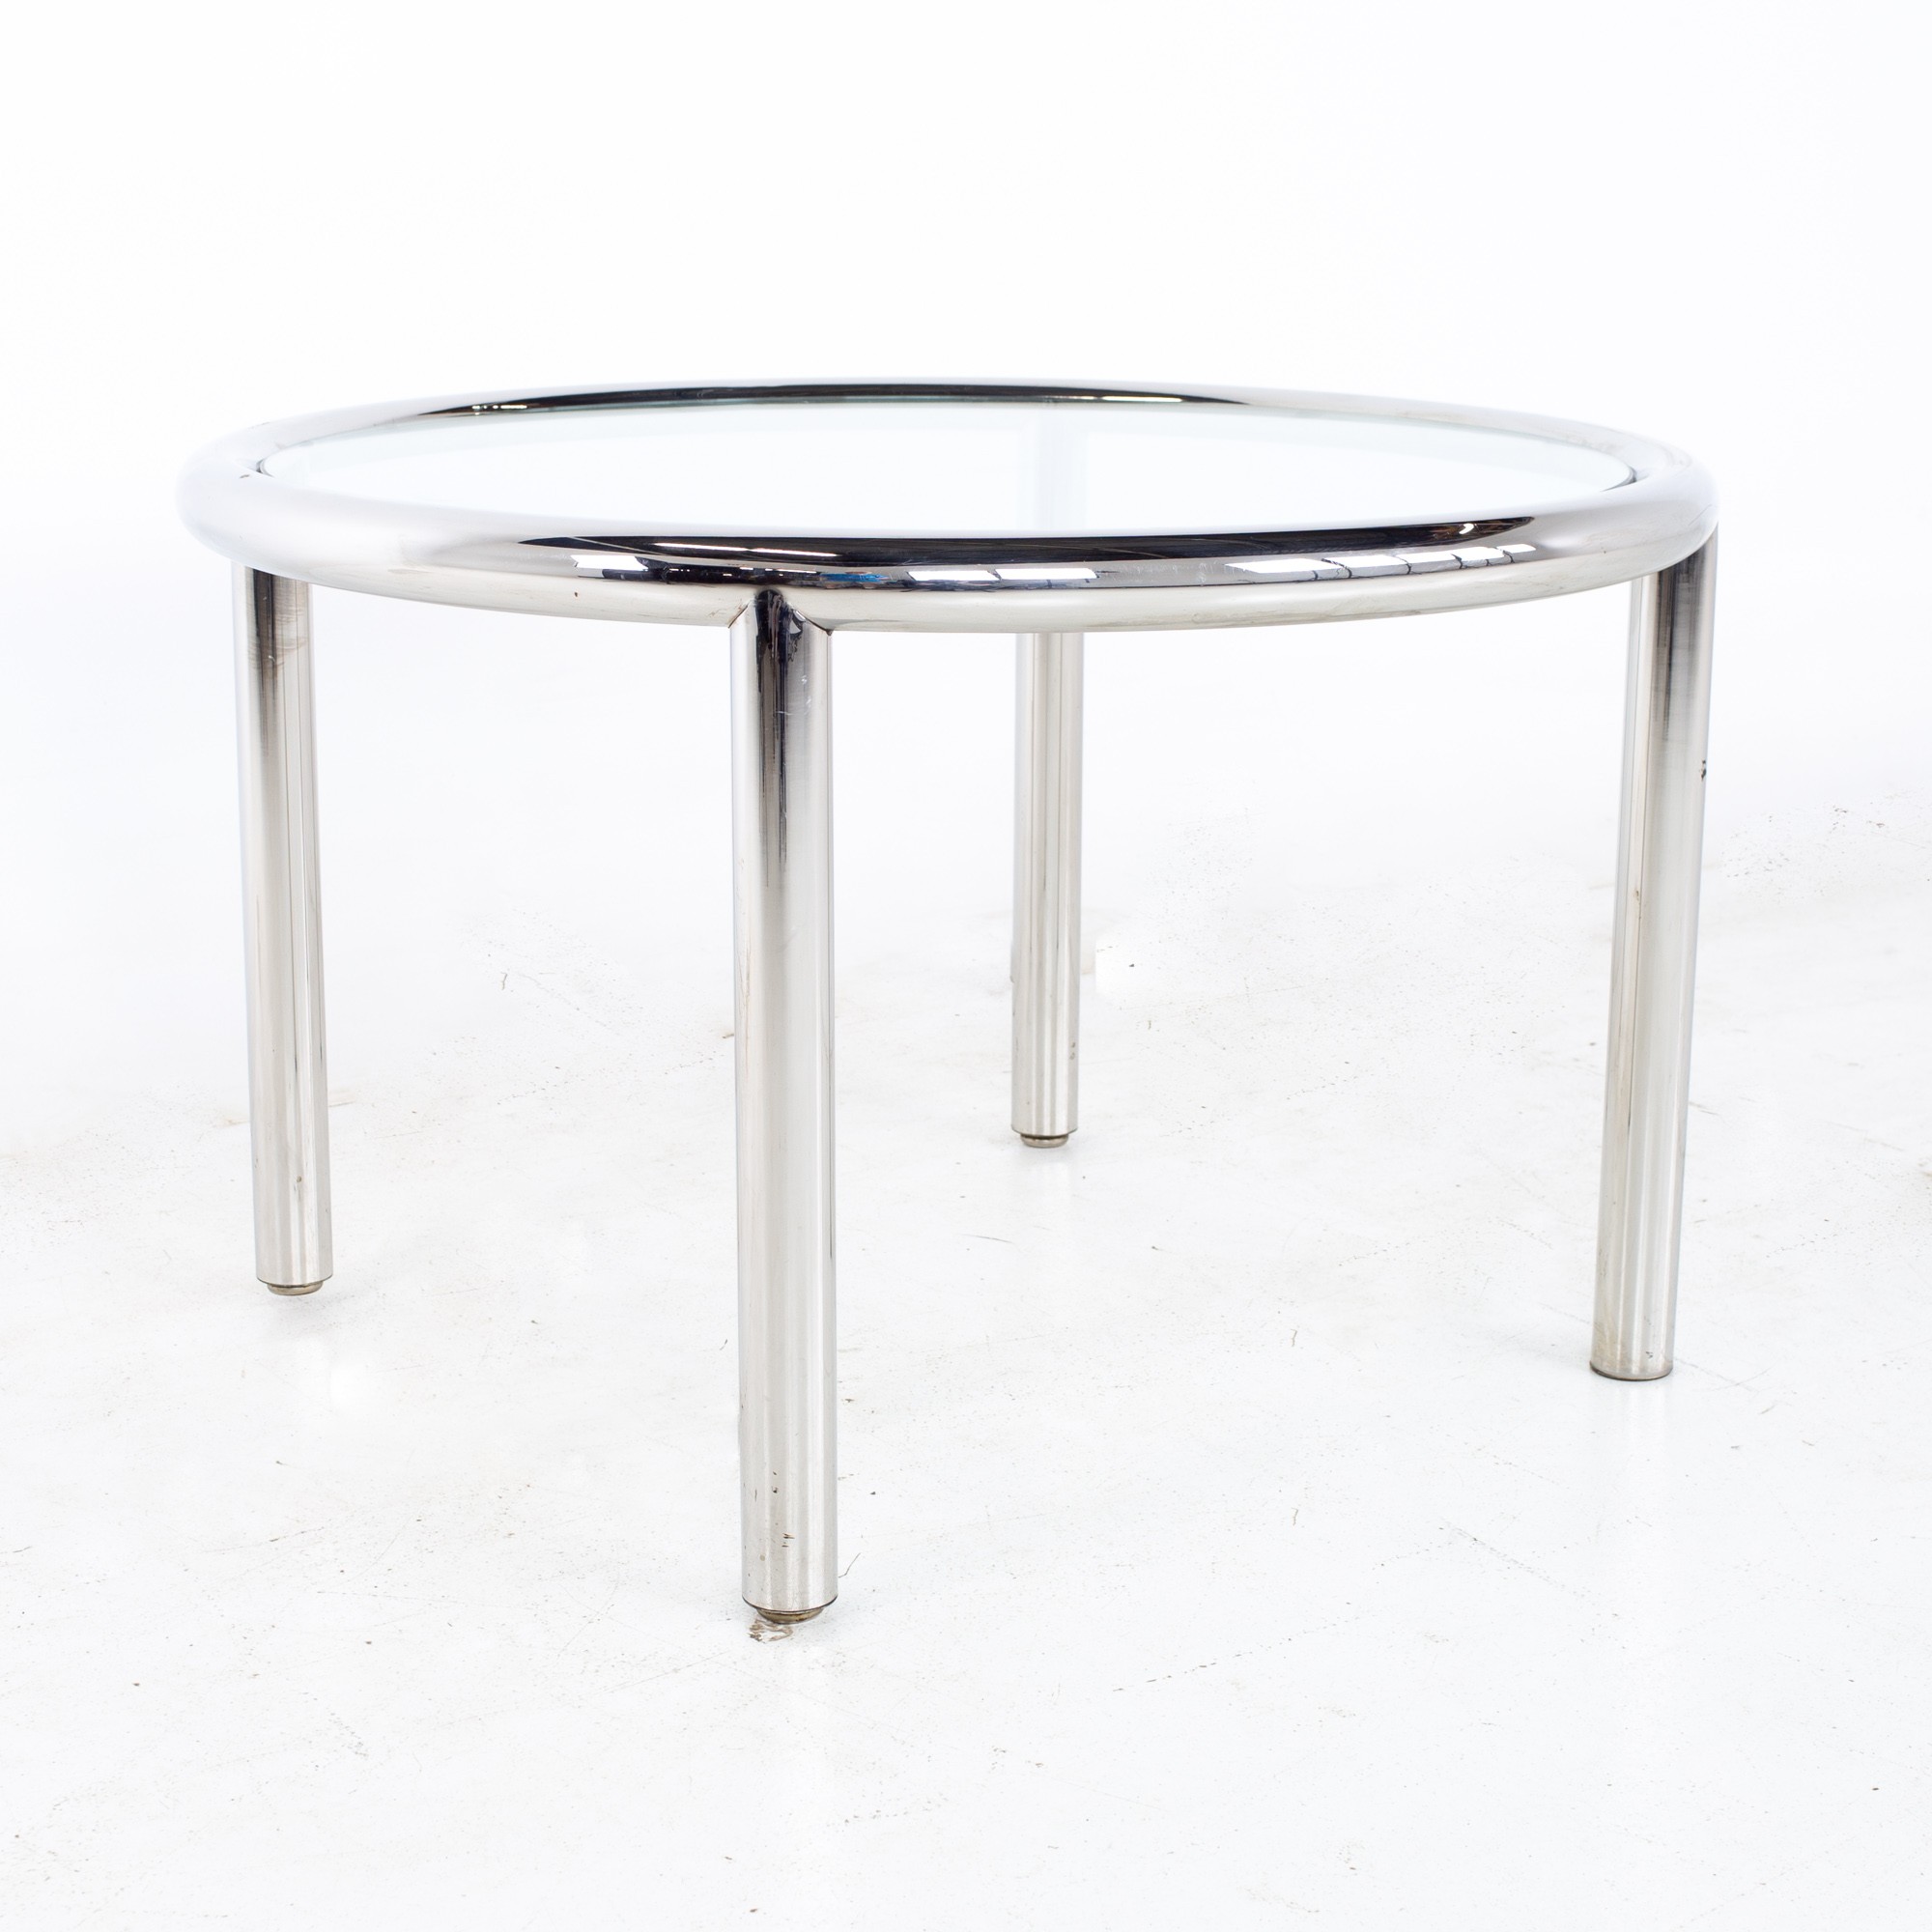 Milo Baughman Style Mid Century Chrome and Glass Round Coffee Table